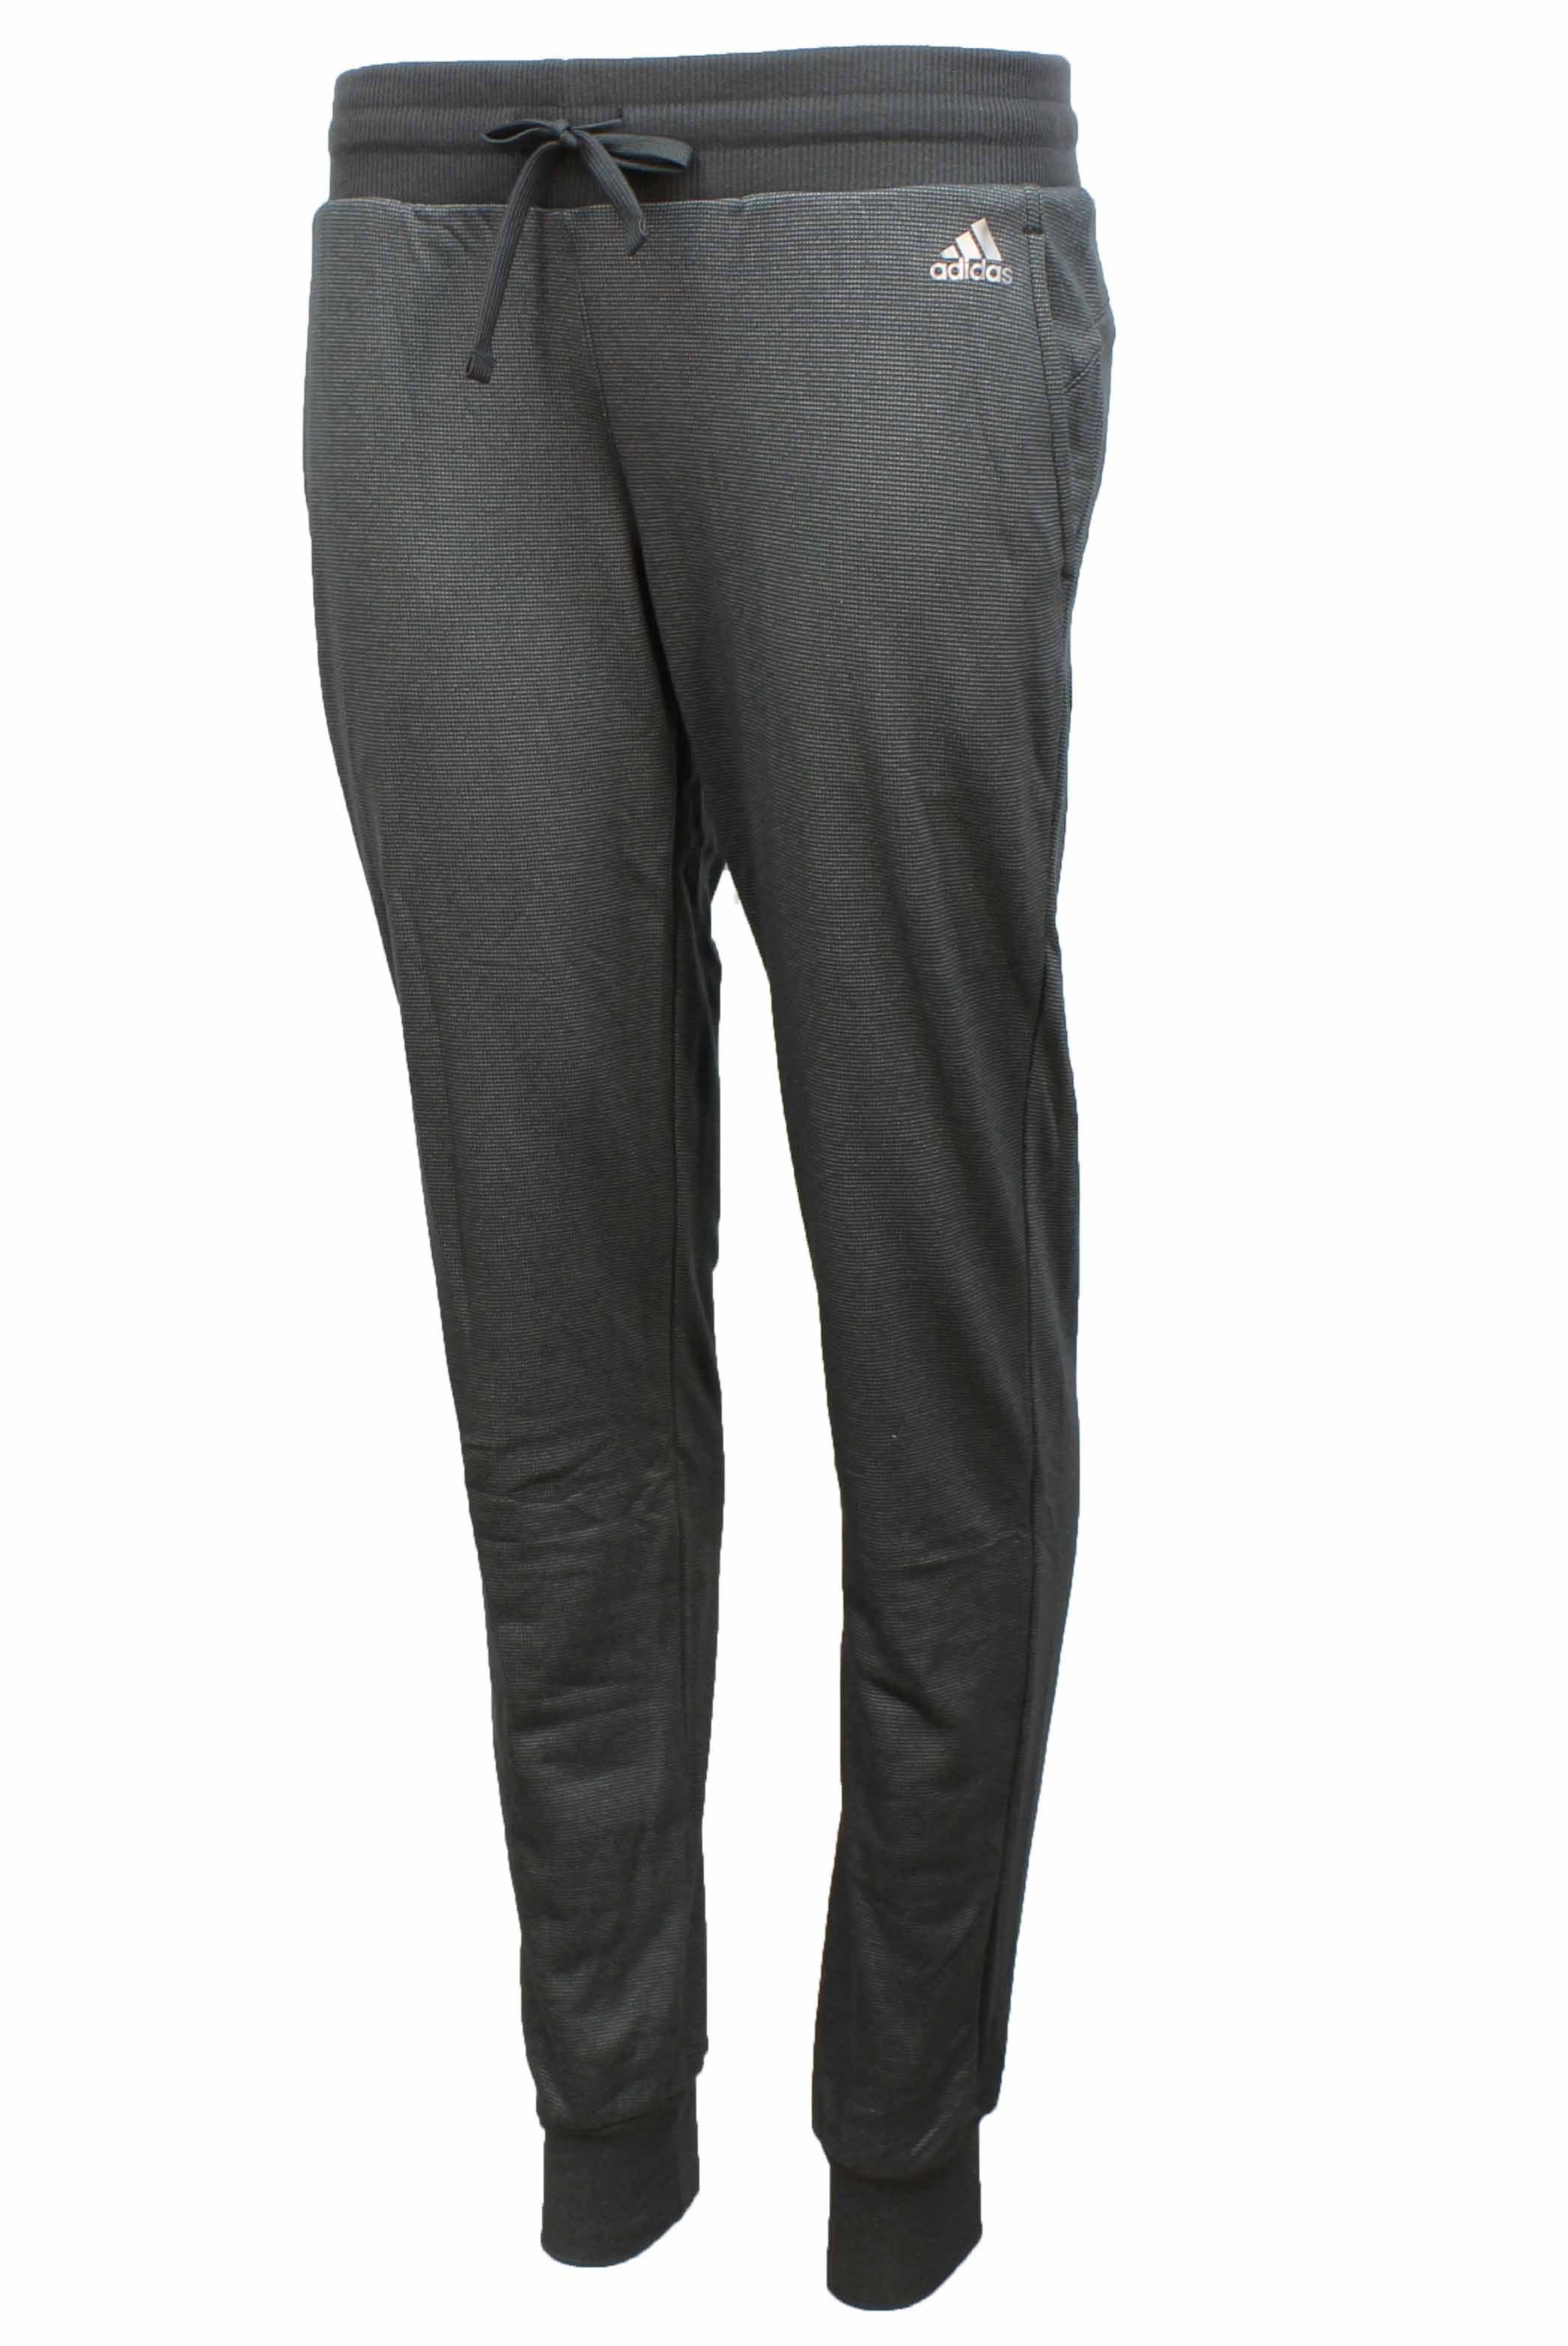 adidas tapered joggers womens